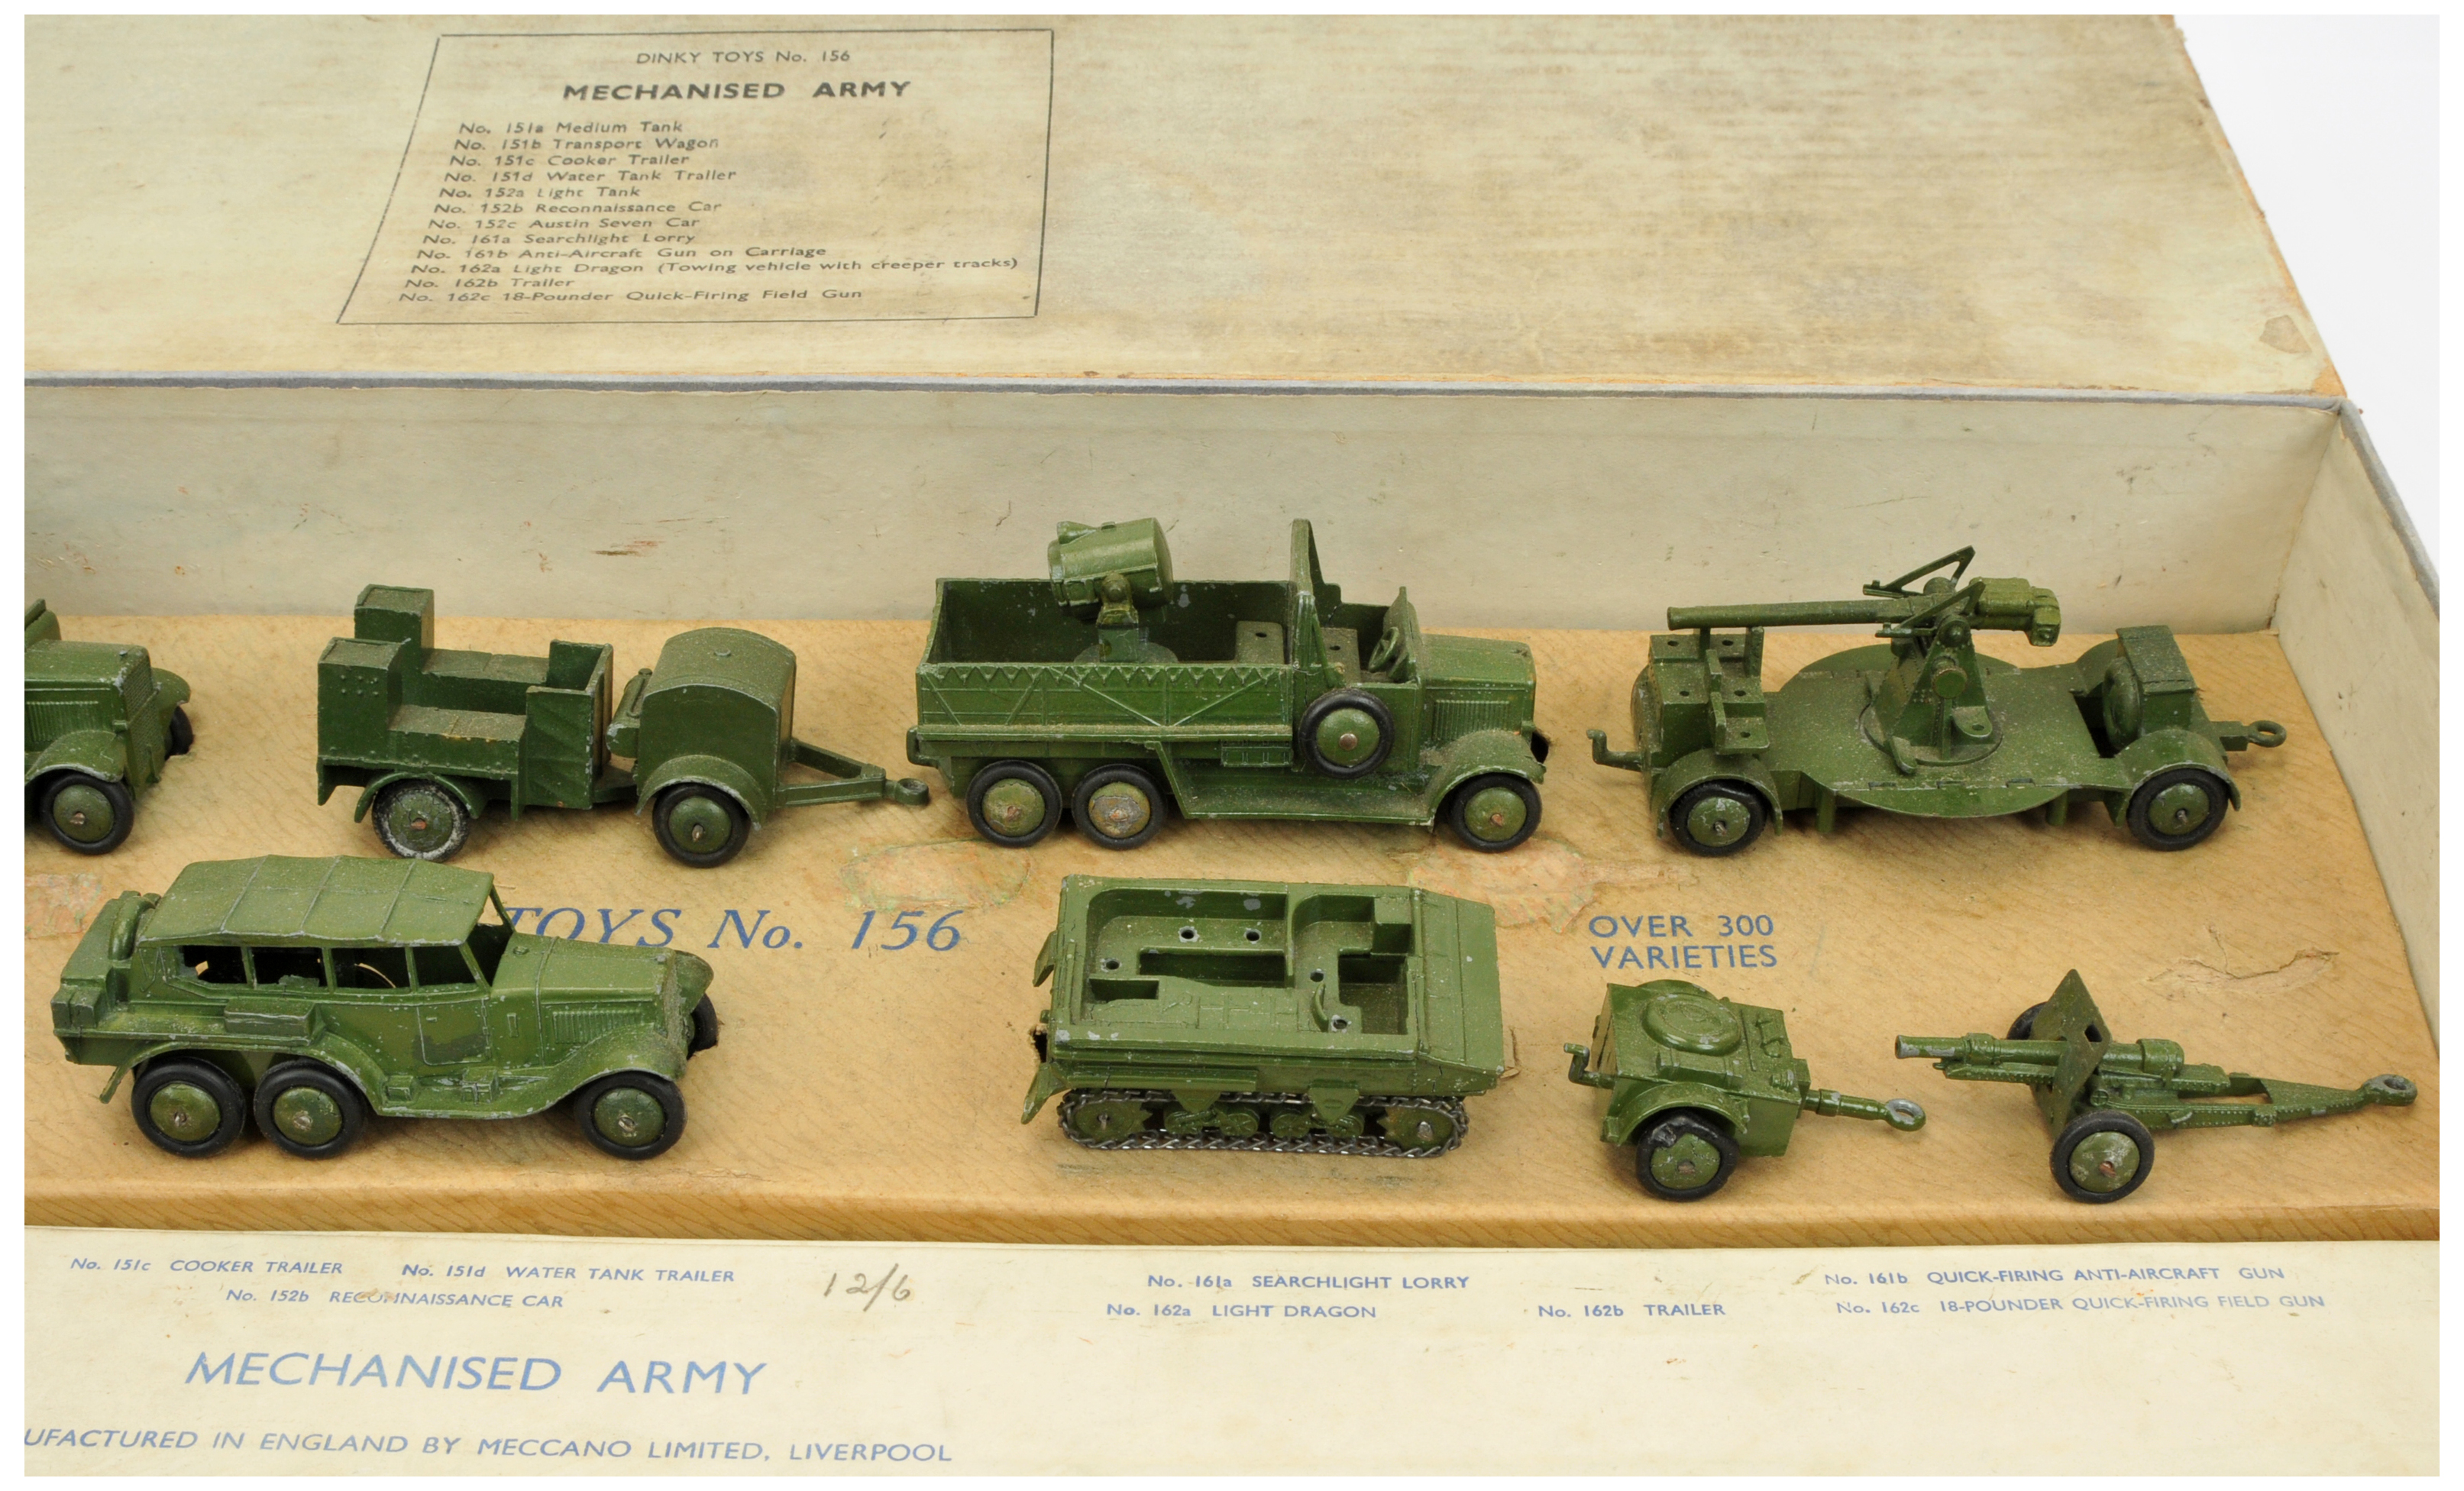 Dinky Toys Military Pre-war 156 "Mechanised Army" Set - this RARE issue contains 151a Medium Tank... - Image 3 of 4